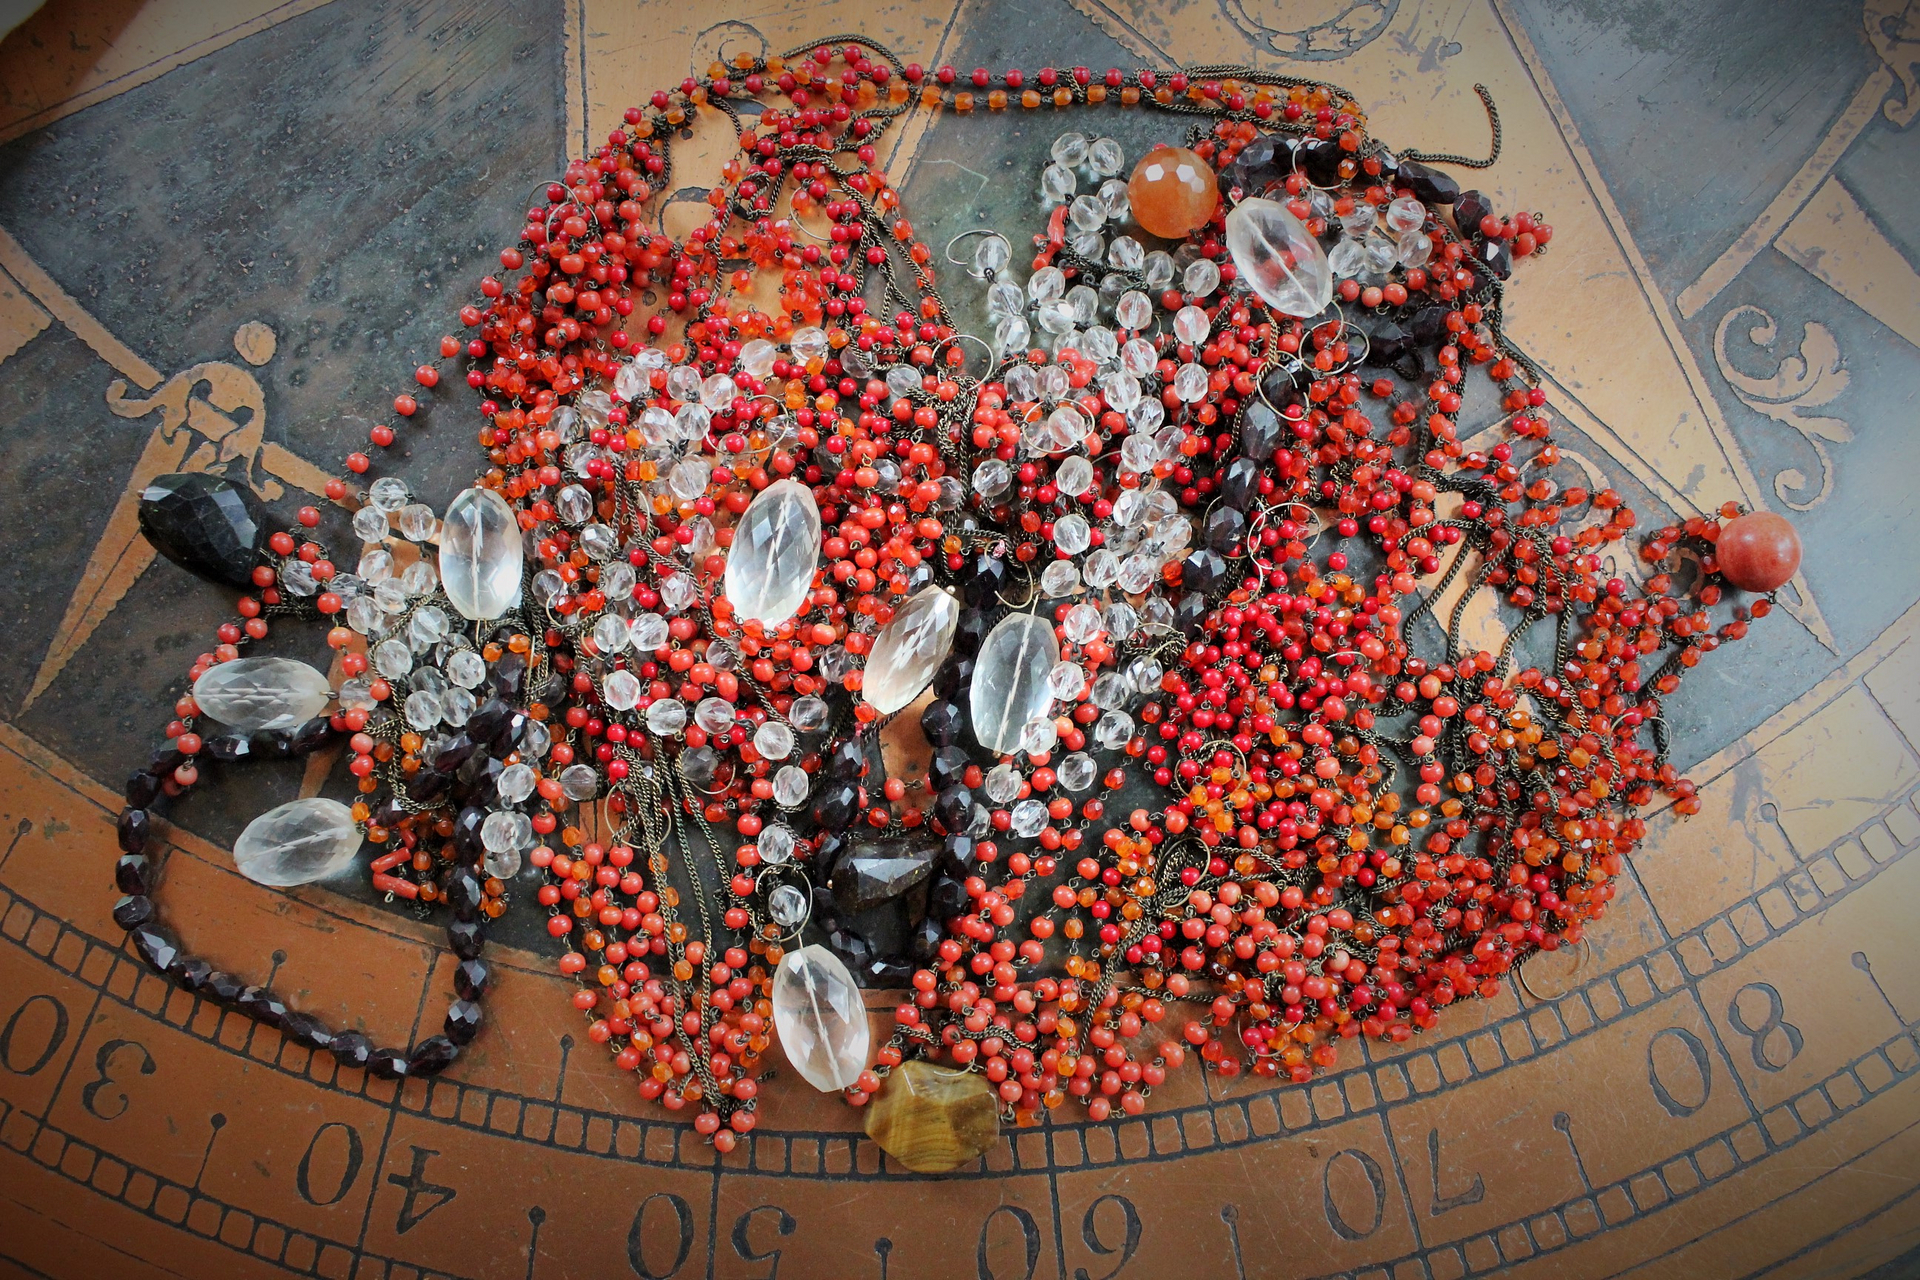 Large Antique Beaded Chain & Faceted Gemstone Lot - perfect for layering necklaces & much more!